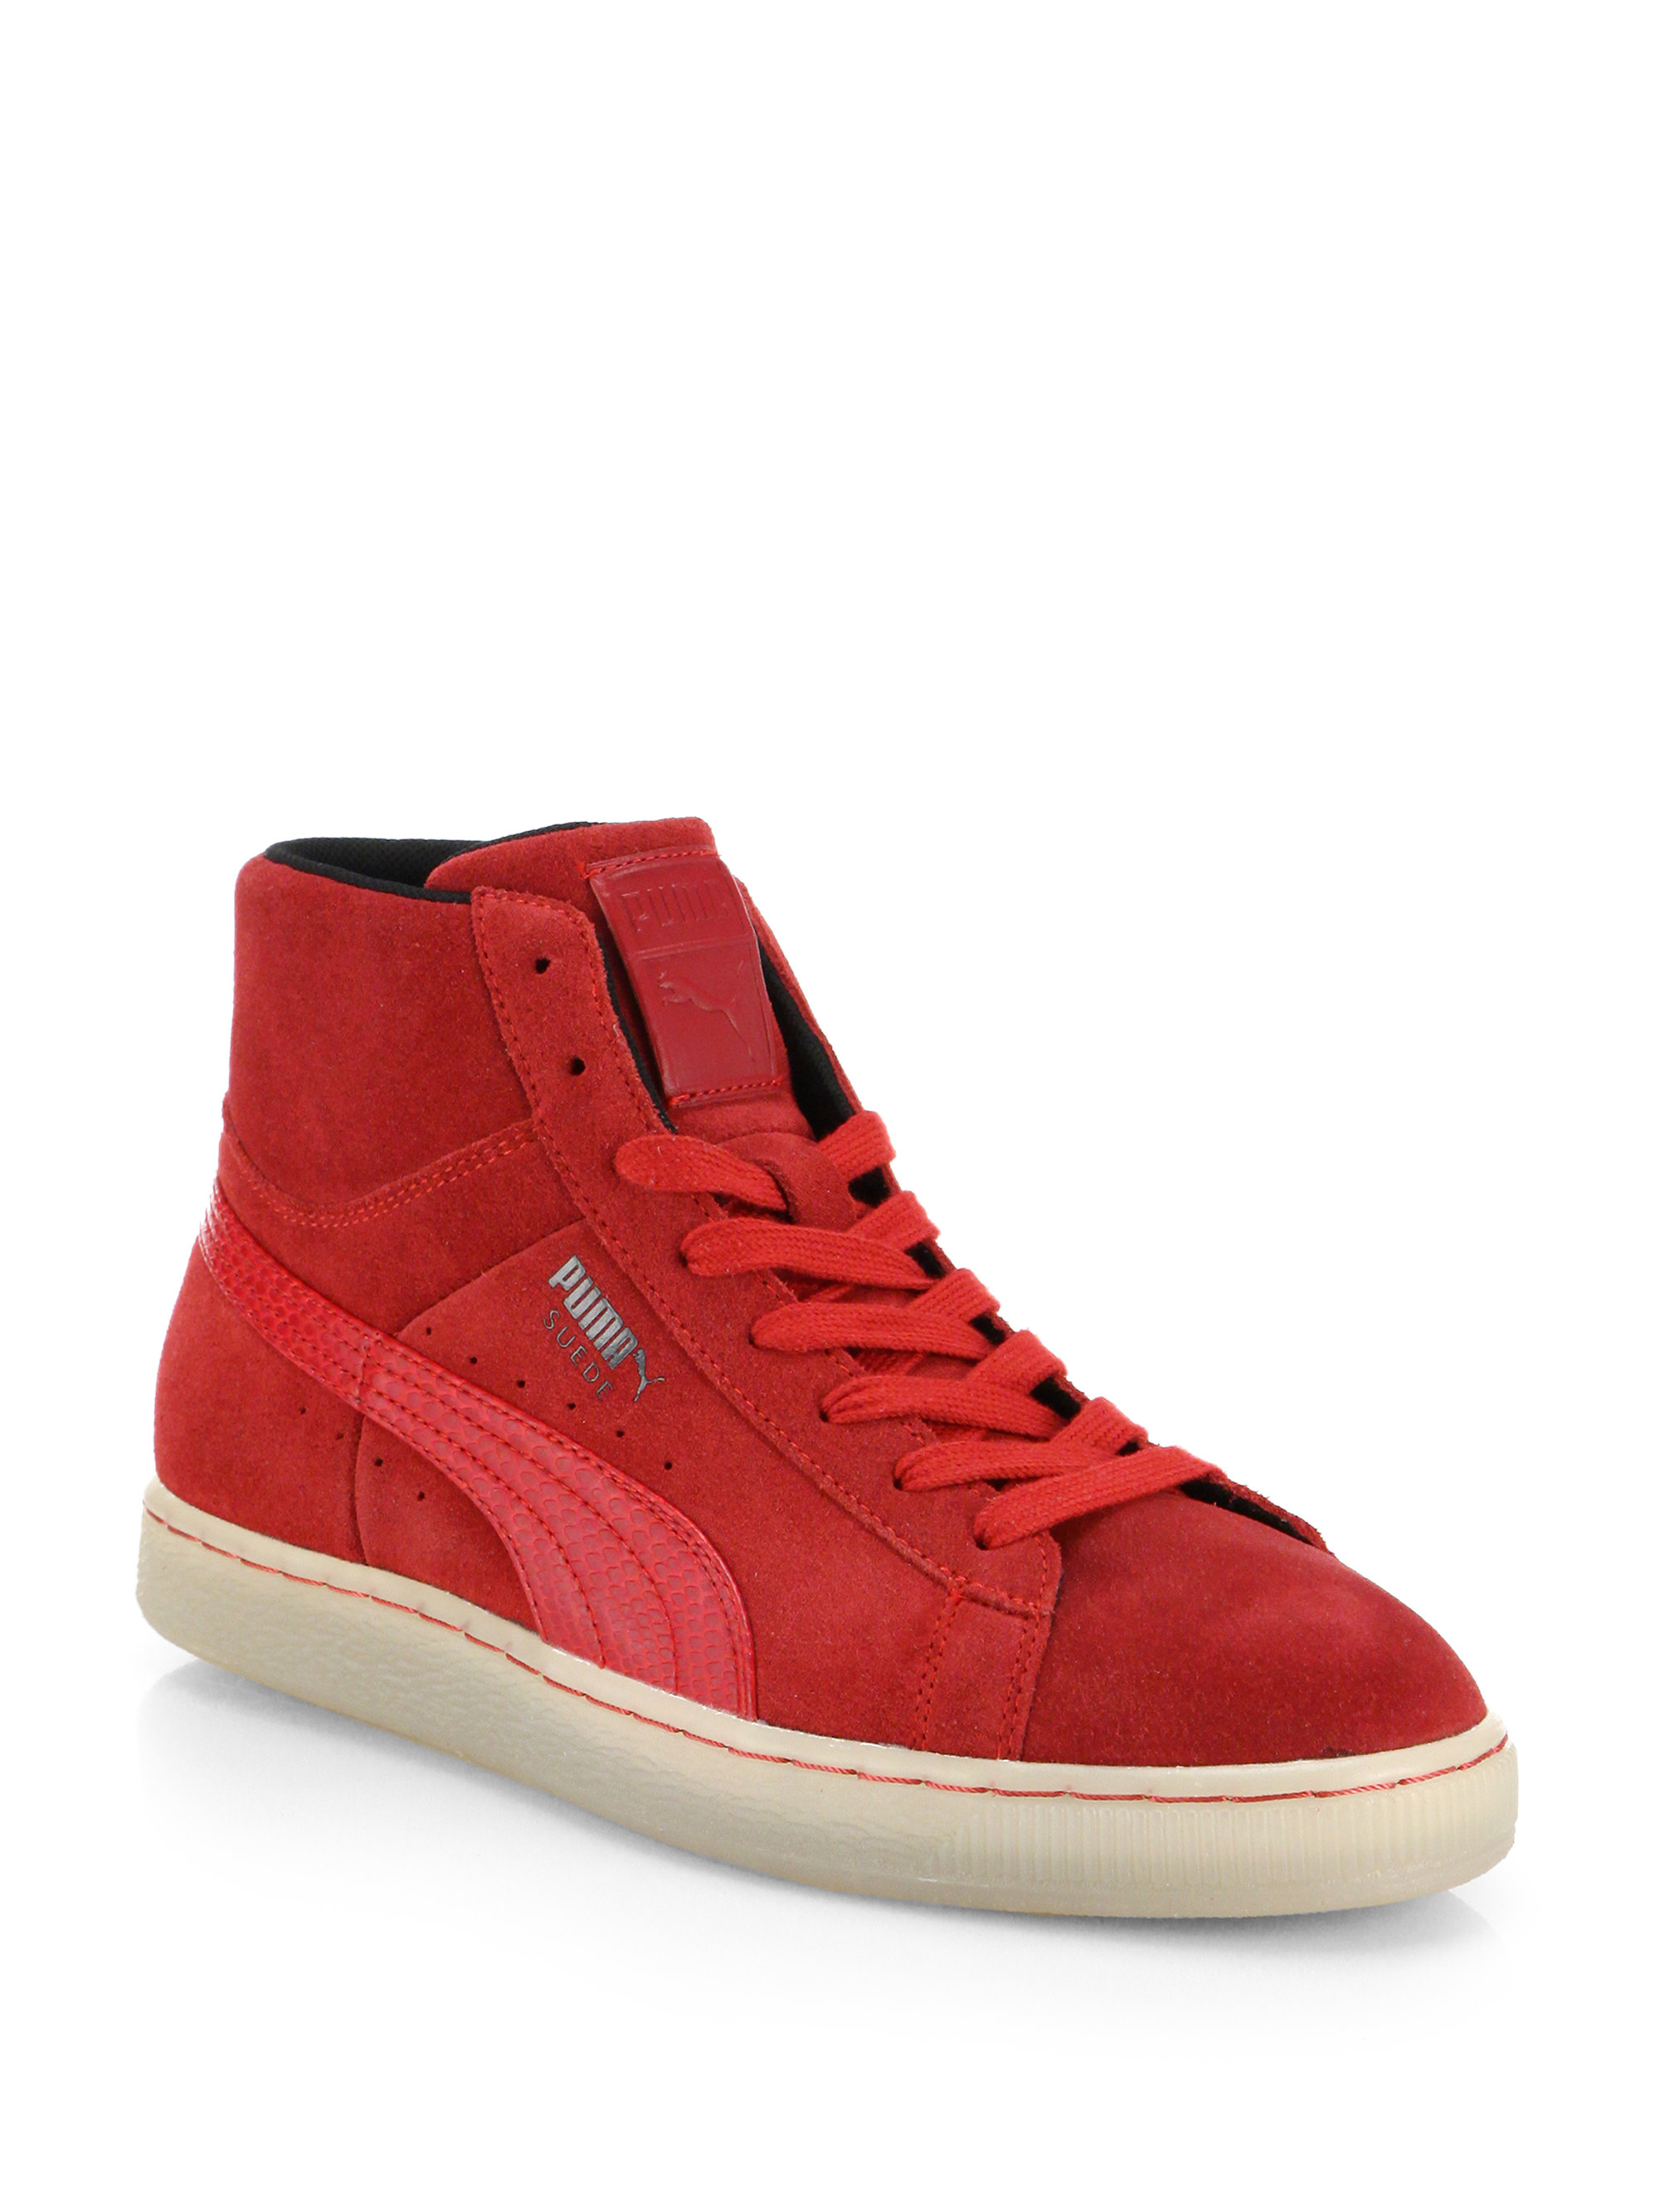 red puma high top shoes